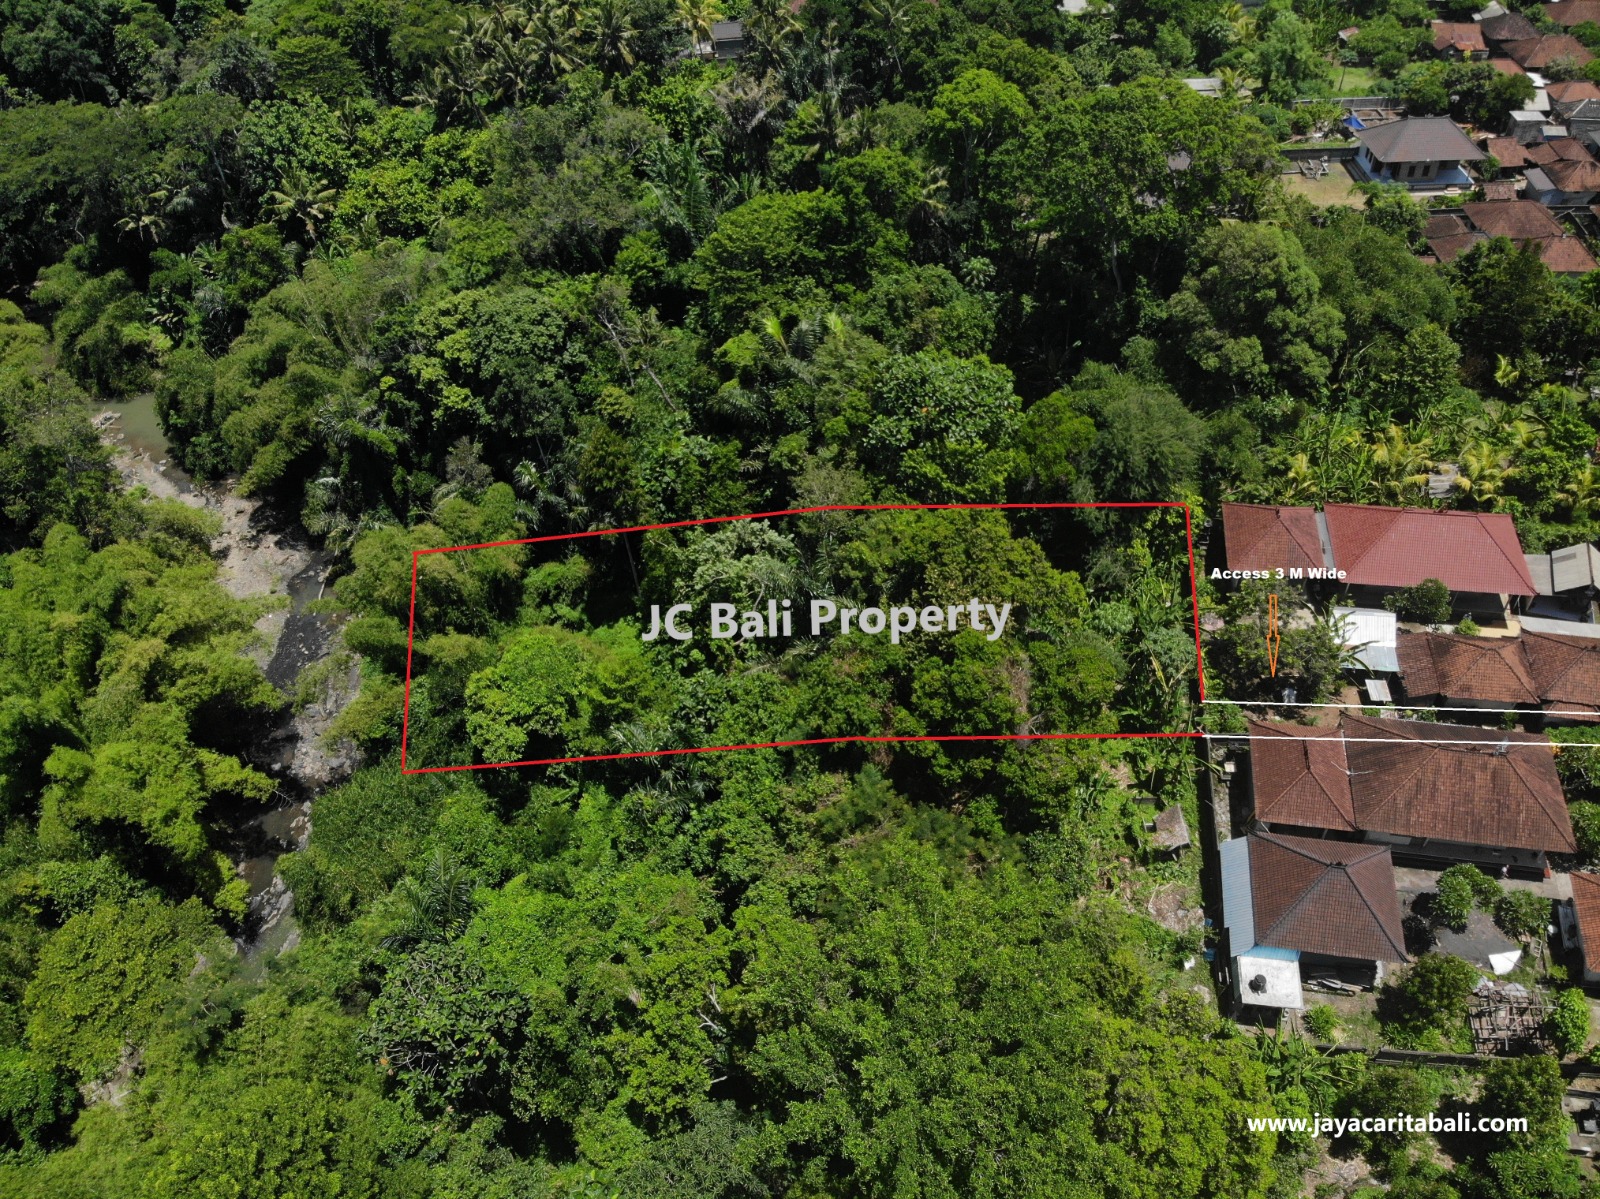 LEASEHOLD LAND IN BUWIT, TABANAN, BALI, INDONESIA, SIZE 12 ARE/1200M2